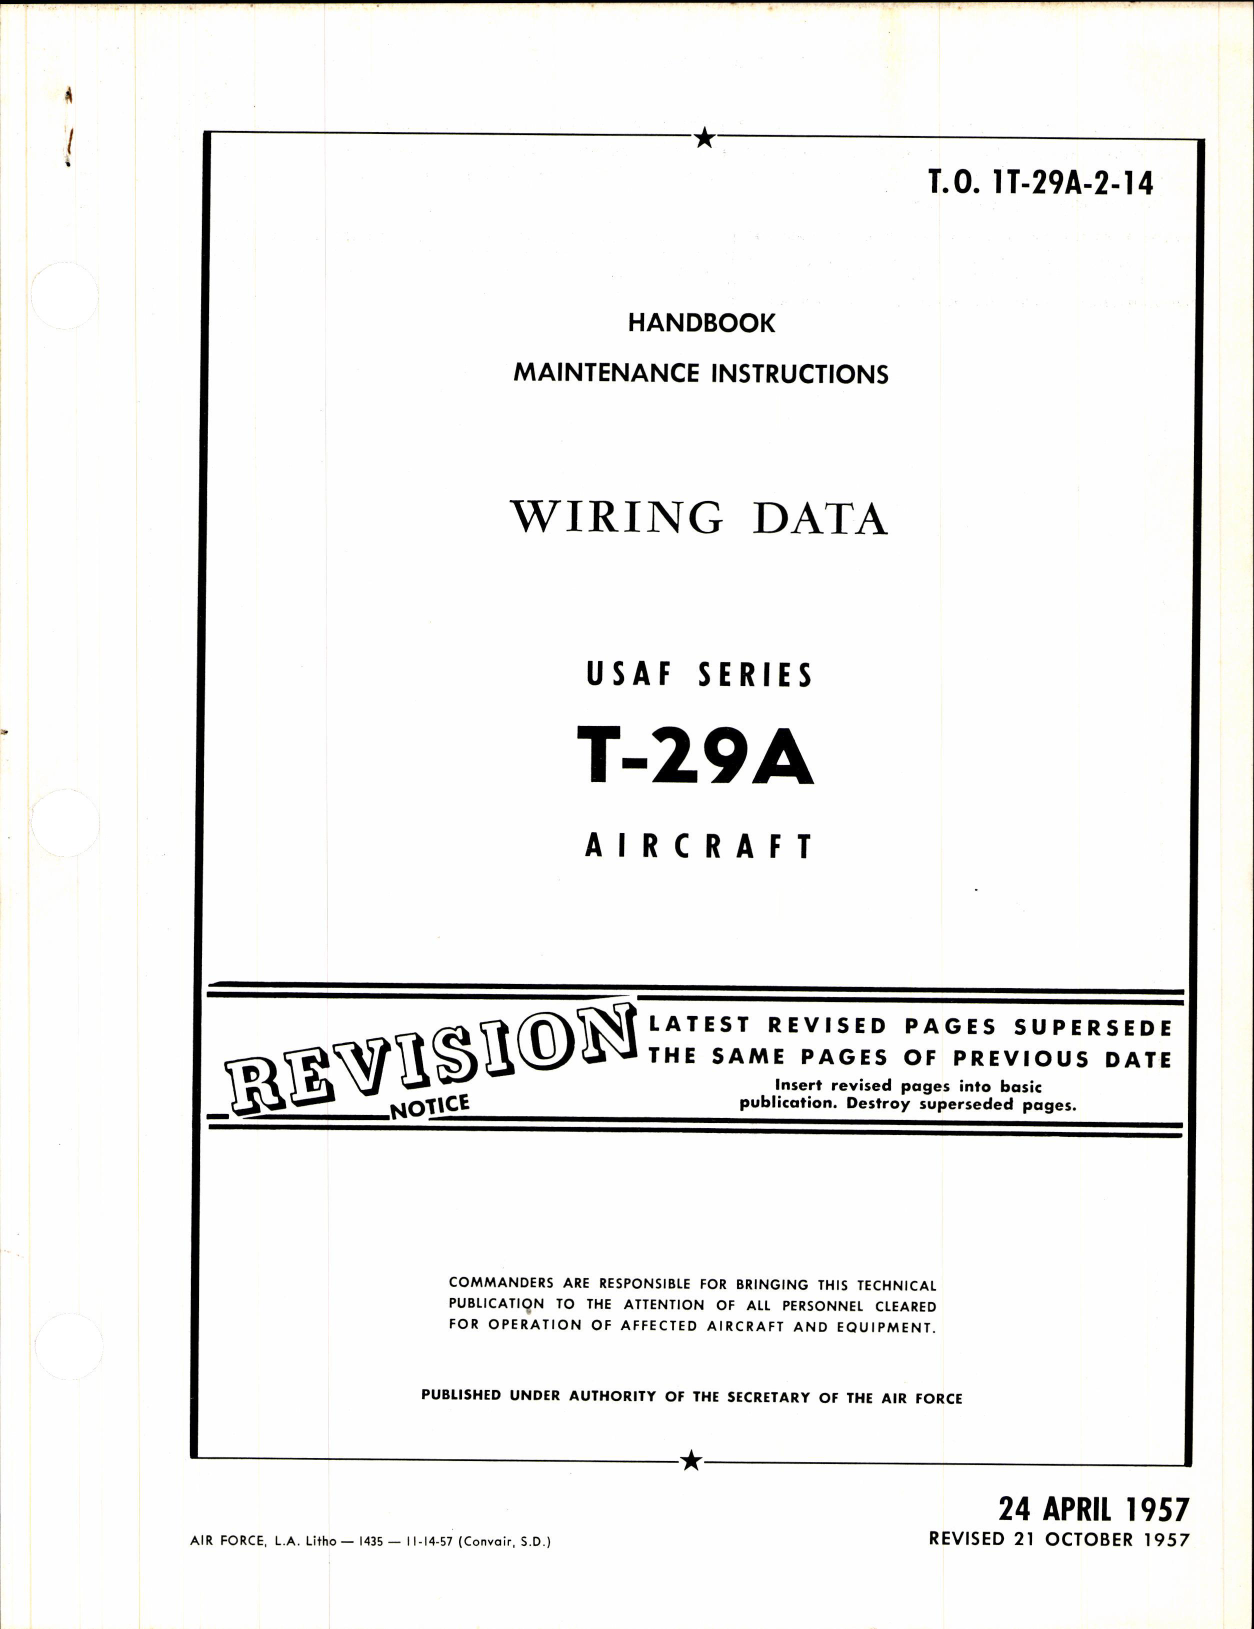 Sample page 1 from AirCorps Library document: Maintenance Instructions Wiring Data for T-29A Aircraft